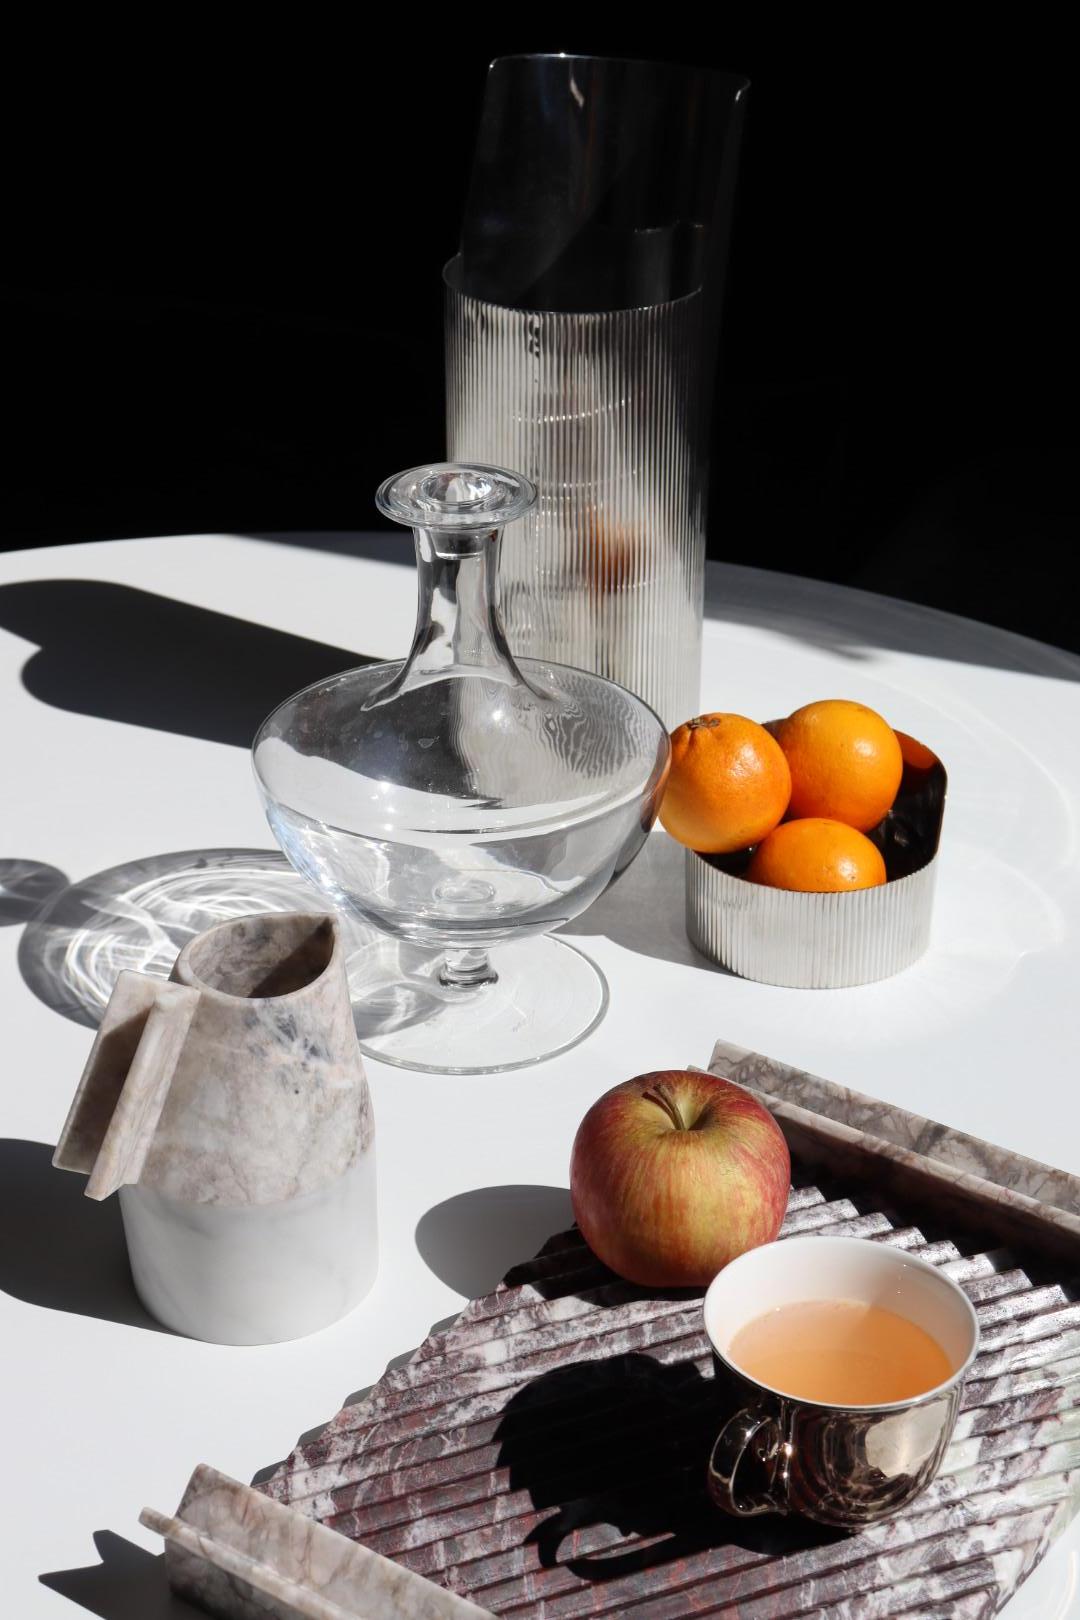 Patricia Urquiola's unmistakable distinguishing feature is reported on a series of water carafes and trays hand made in Italy in marble.